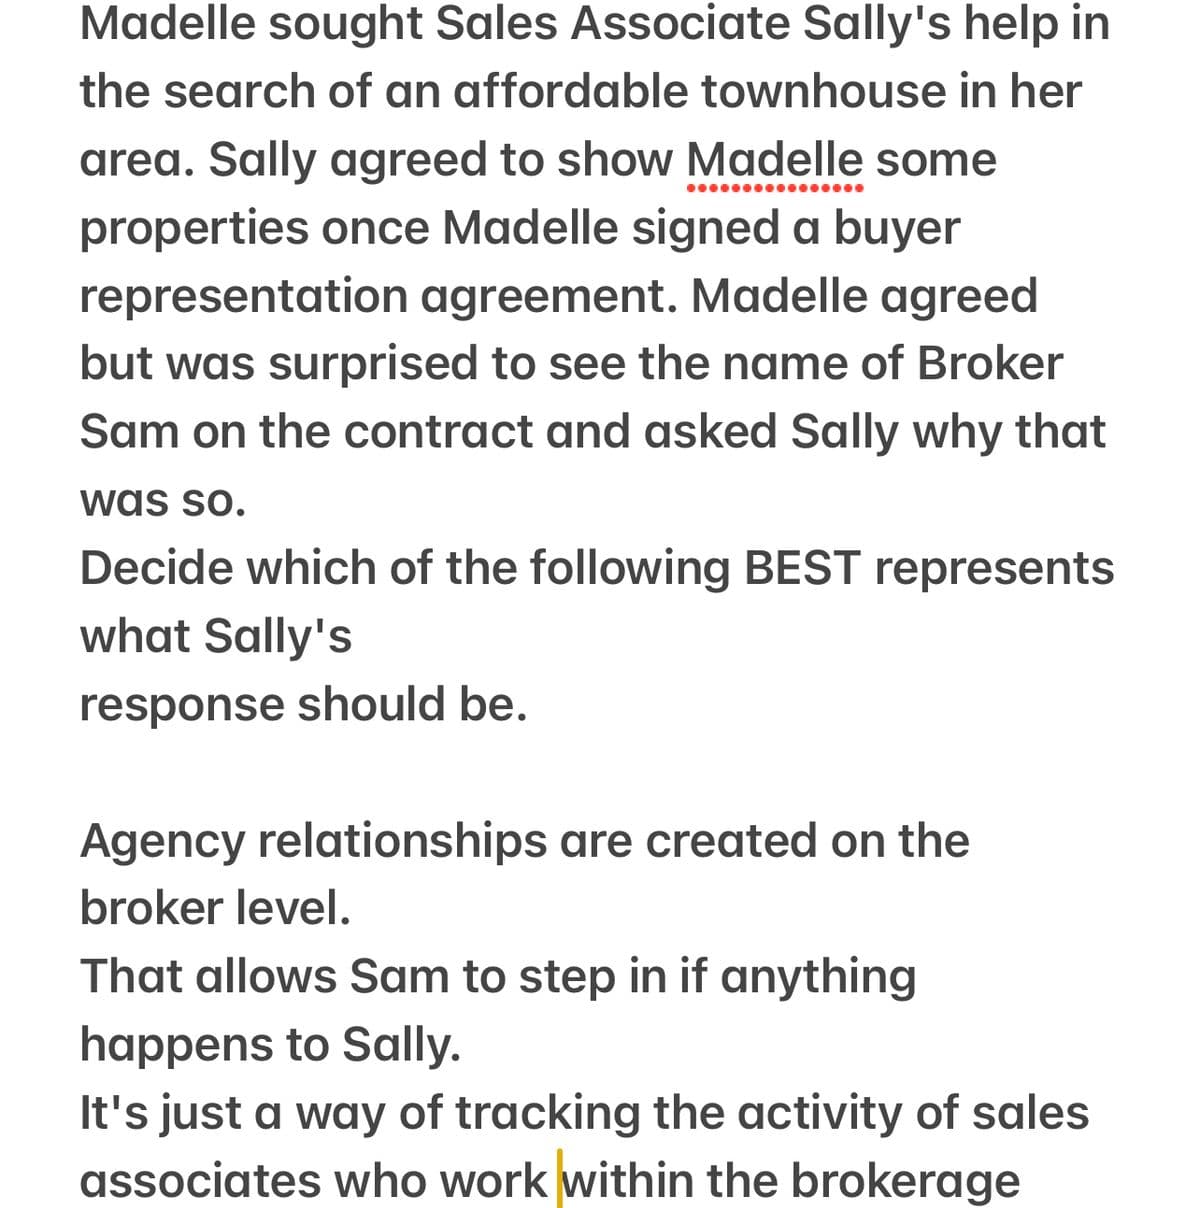 Madelle sought Sales Associate Sally's help in
the search of an affordable townhouse in her
area. Sally agreed to show Madelle some
properties once Madelle signed a buyer
representation agreement. Madelle agreed
but was surprised to see the name of Broker
Sam on the contract and asked Sally why that
was so.
Decide which of the following BEST represents
what Sally's
response should be.
Agency relationships are created on the
broker level.
That allows Sam to step in if anything
happens to Sally.
It's just a way of tracking the activity of sales
associates who work within the brokerage